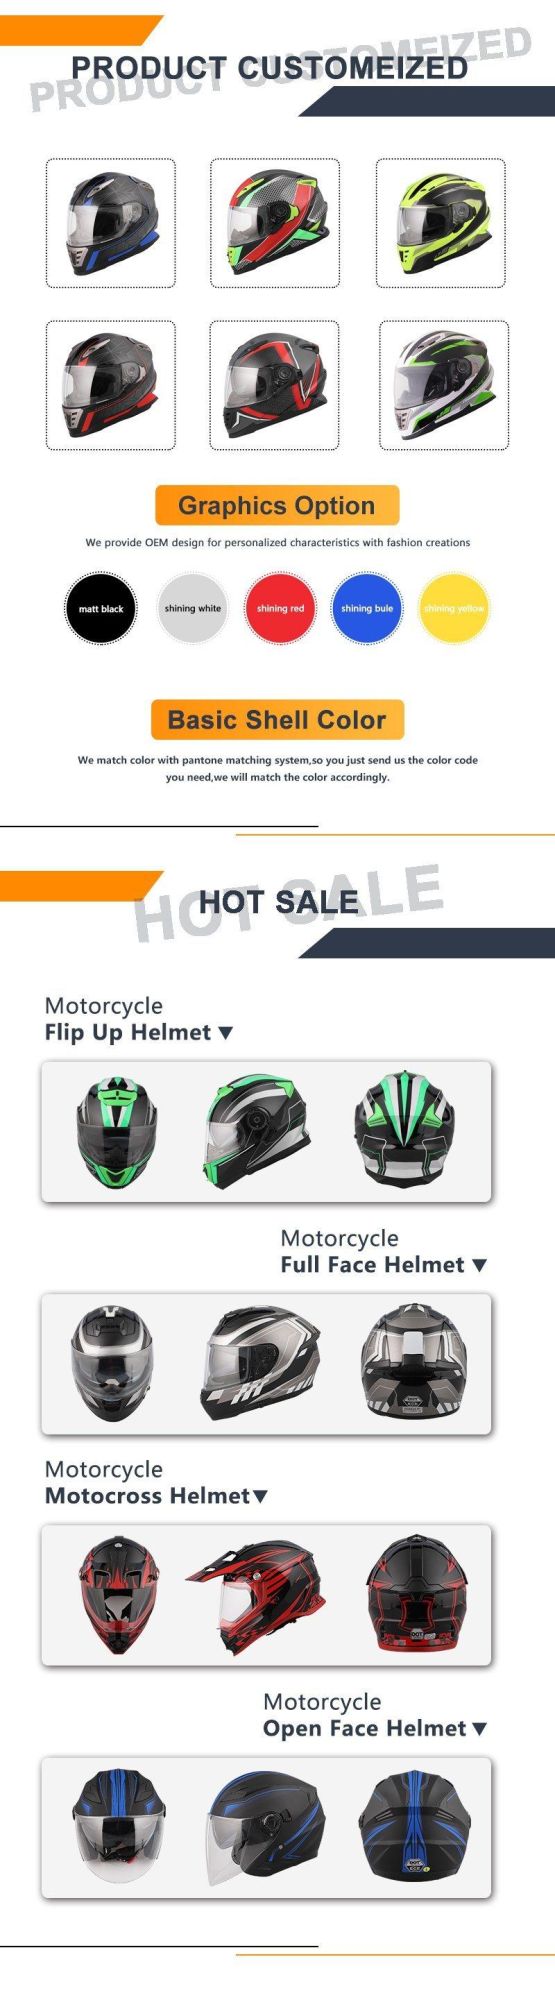 Best Price Really Coll Motorcycle Helmets Discount Full Face Helmets for Sale